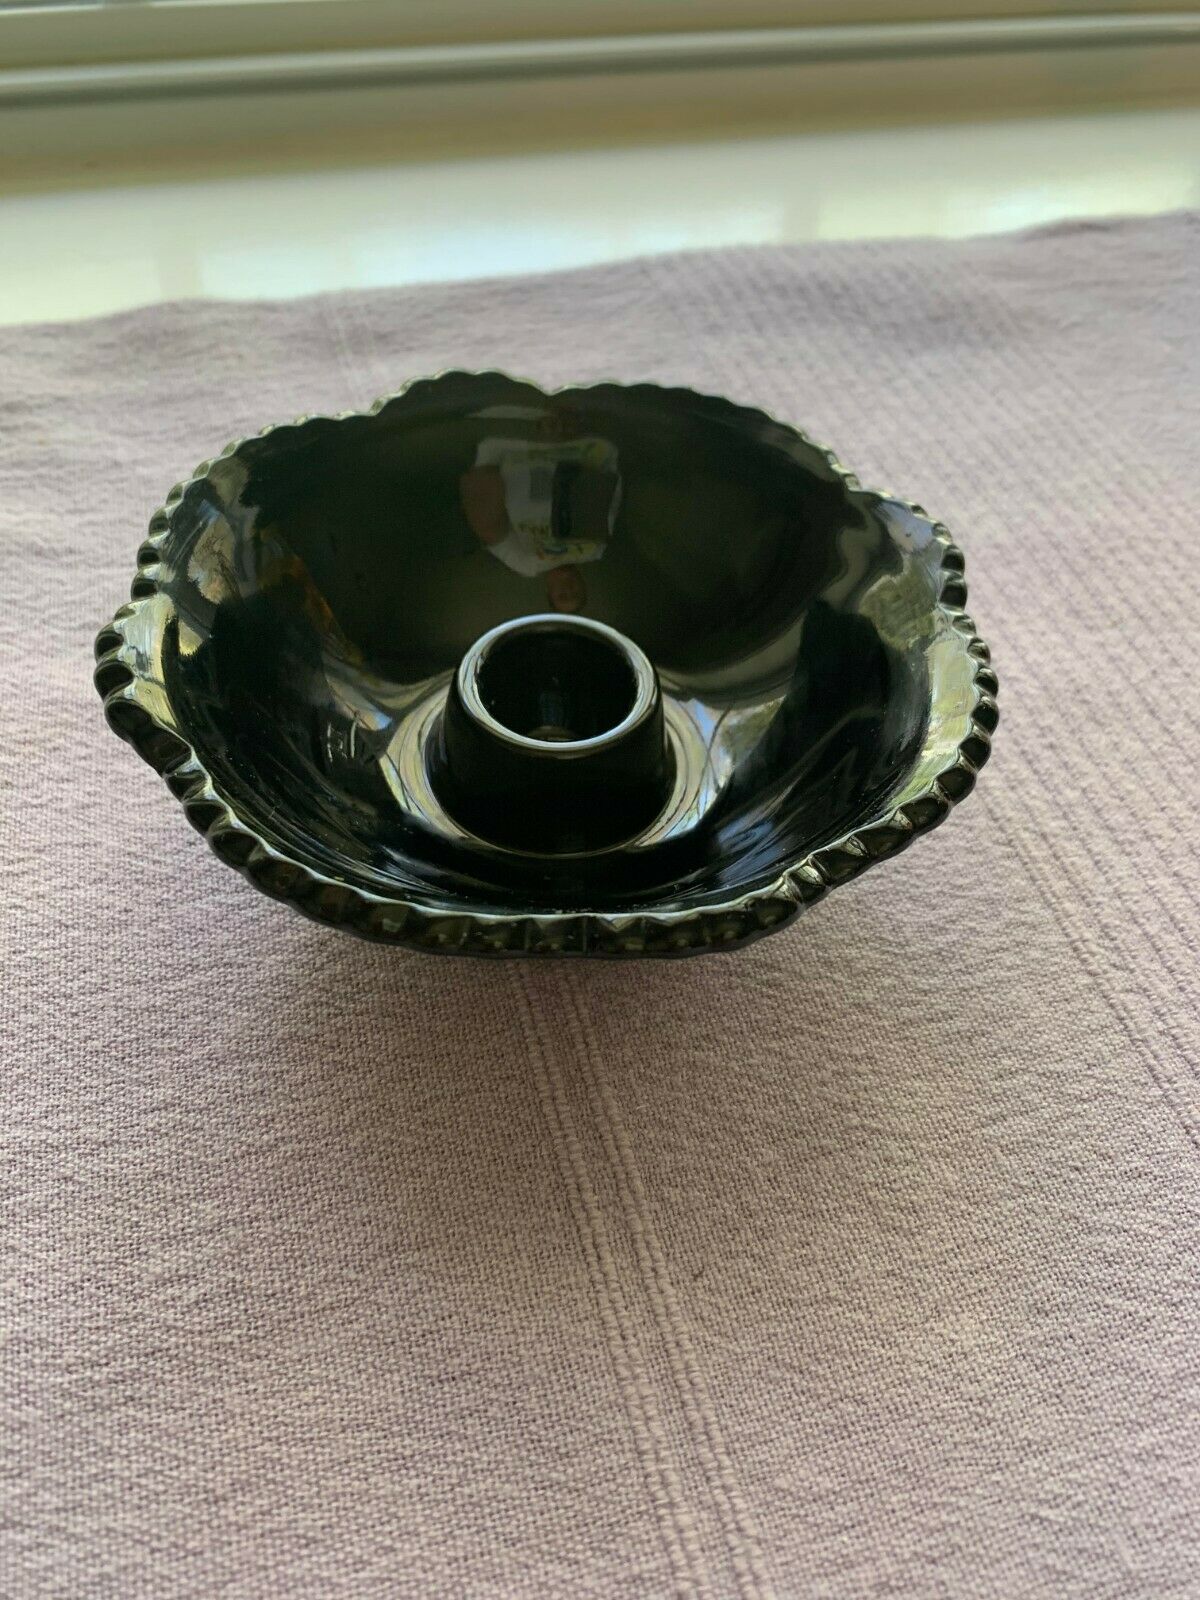 Vintage Black Opaque Pressed Cut Glass Bowl Candle Holder Pillar Taper